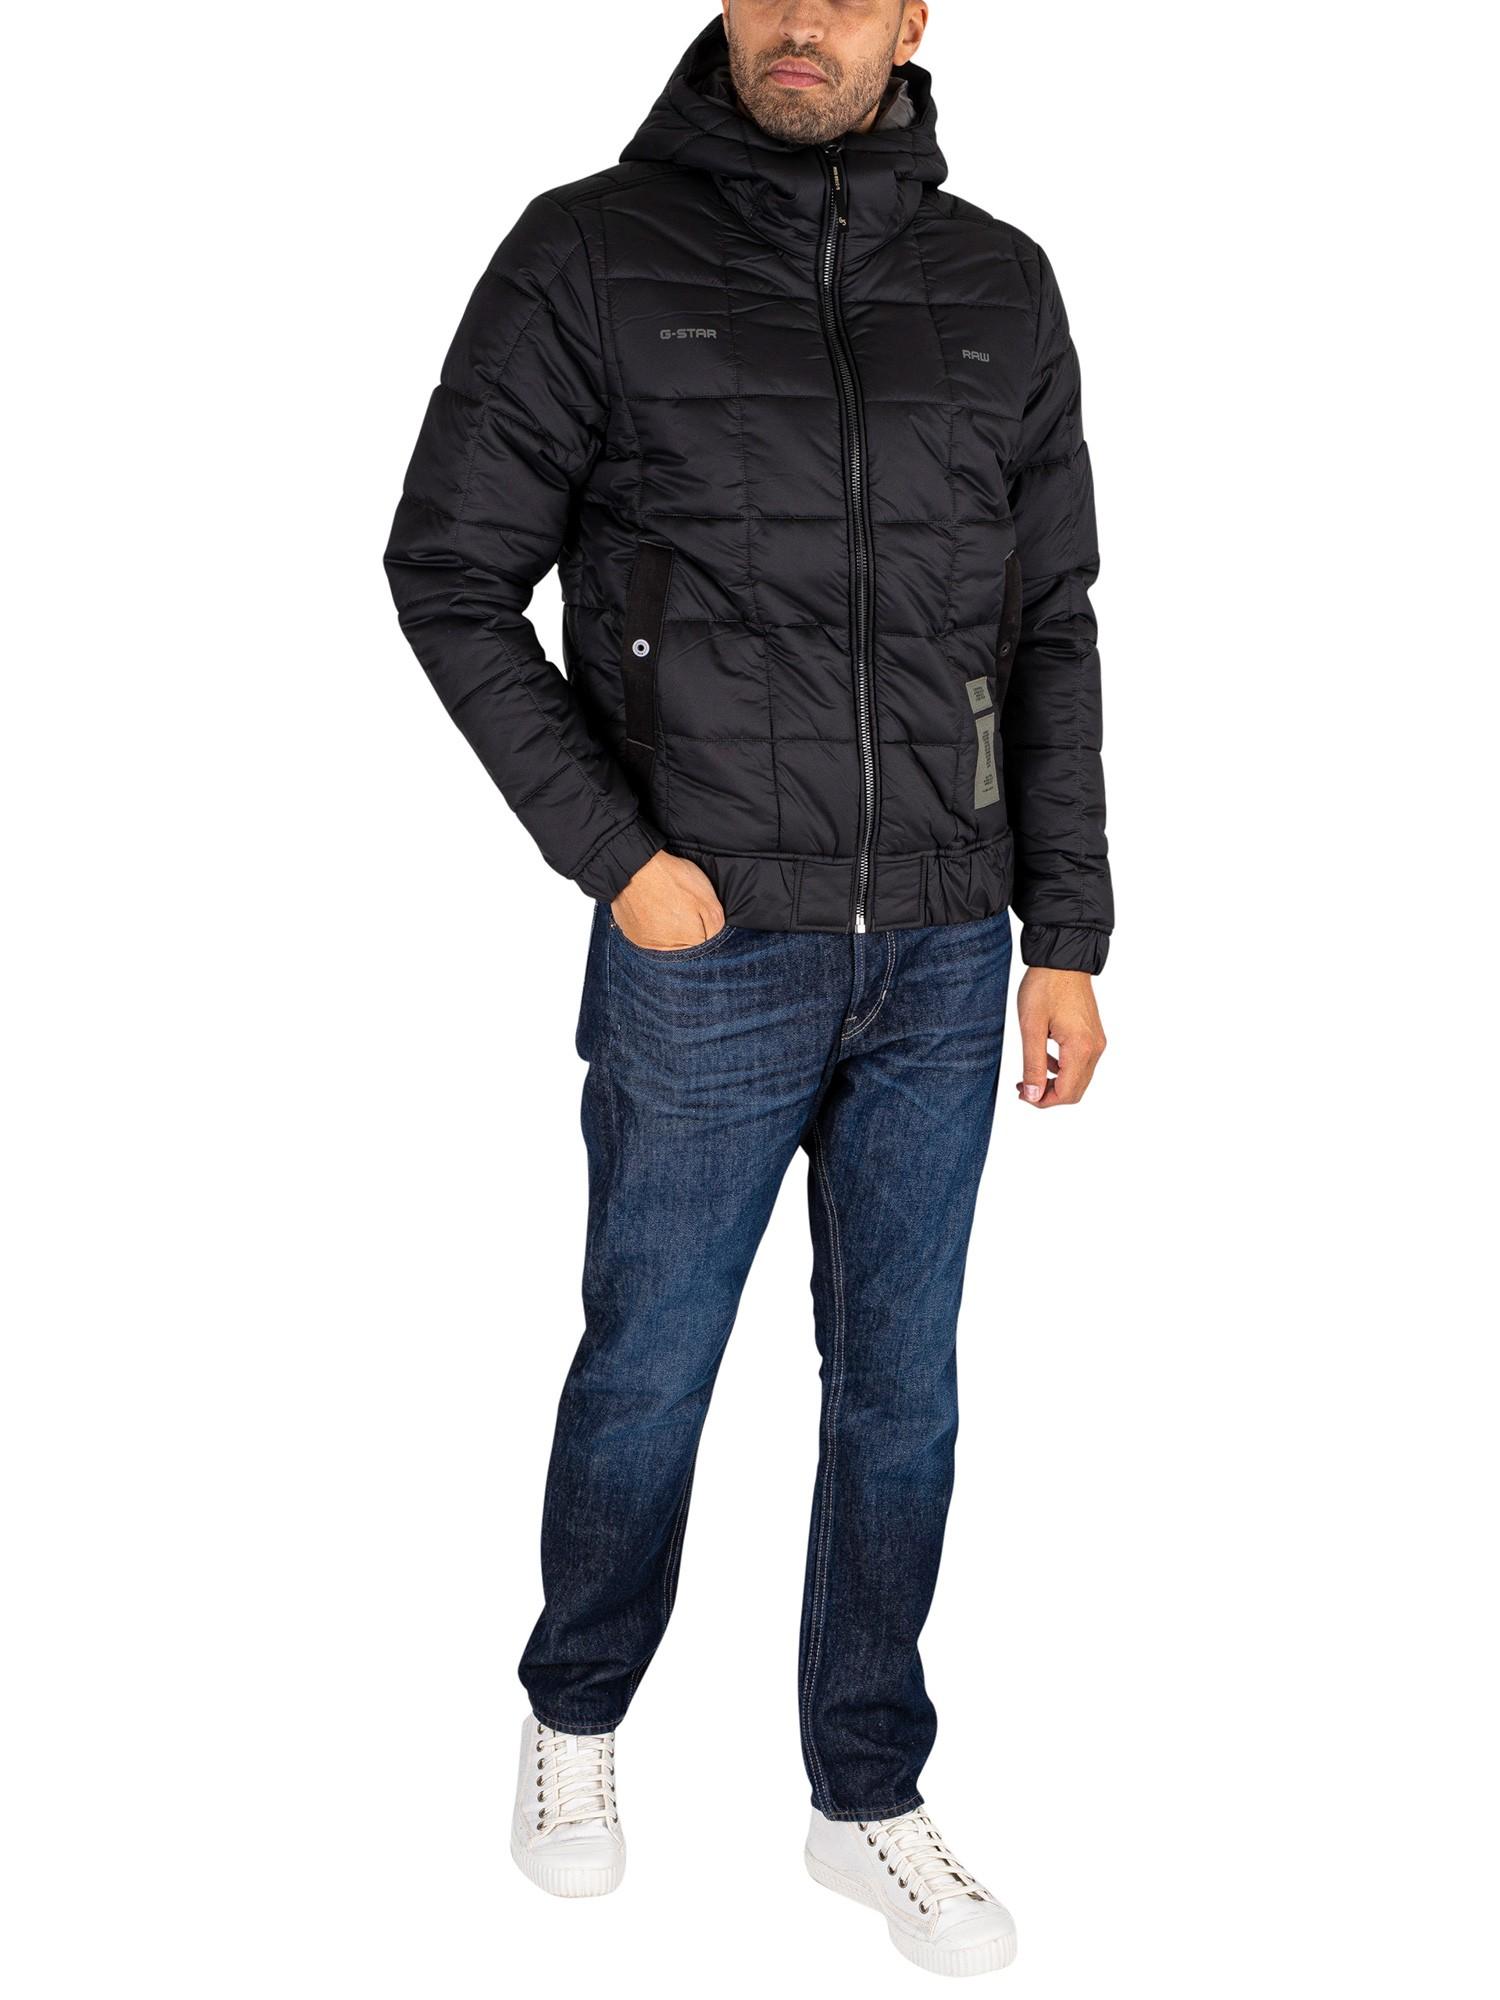 G-Star RAW Meefic Hooded Quilted Jacket in Black for Men | Lyst